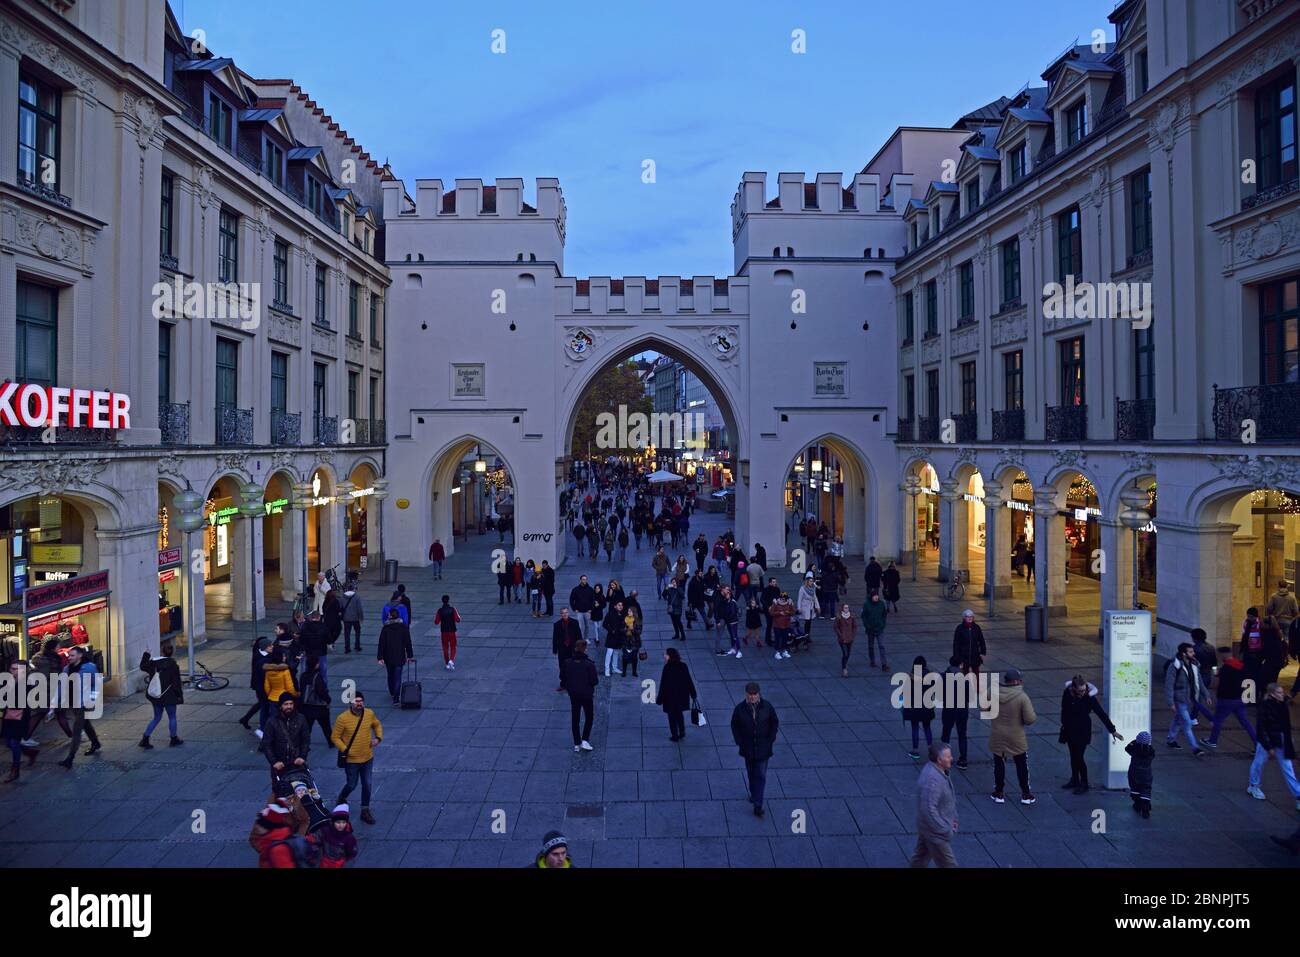 Europe, Germany, Bavaria, Munich, City, Stachus, Karlstor, view into Neuhauser Strasse, shopping mile, evening, many passers-by Stock Photo